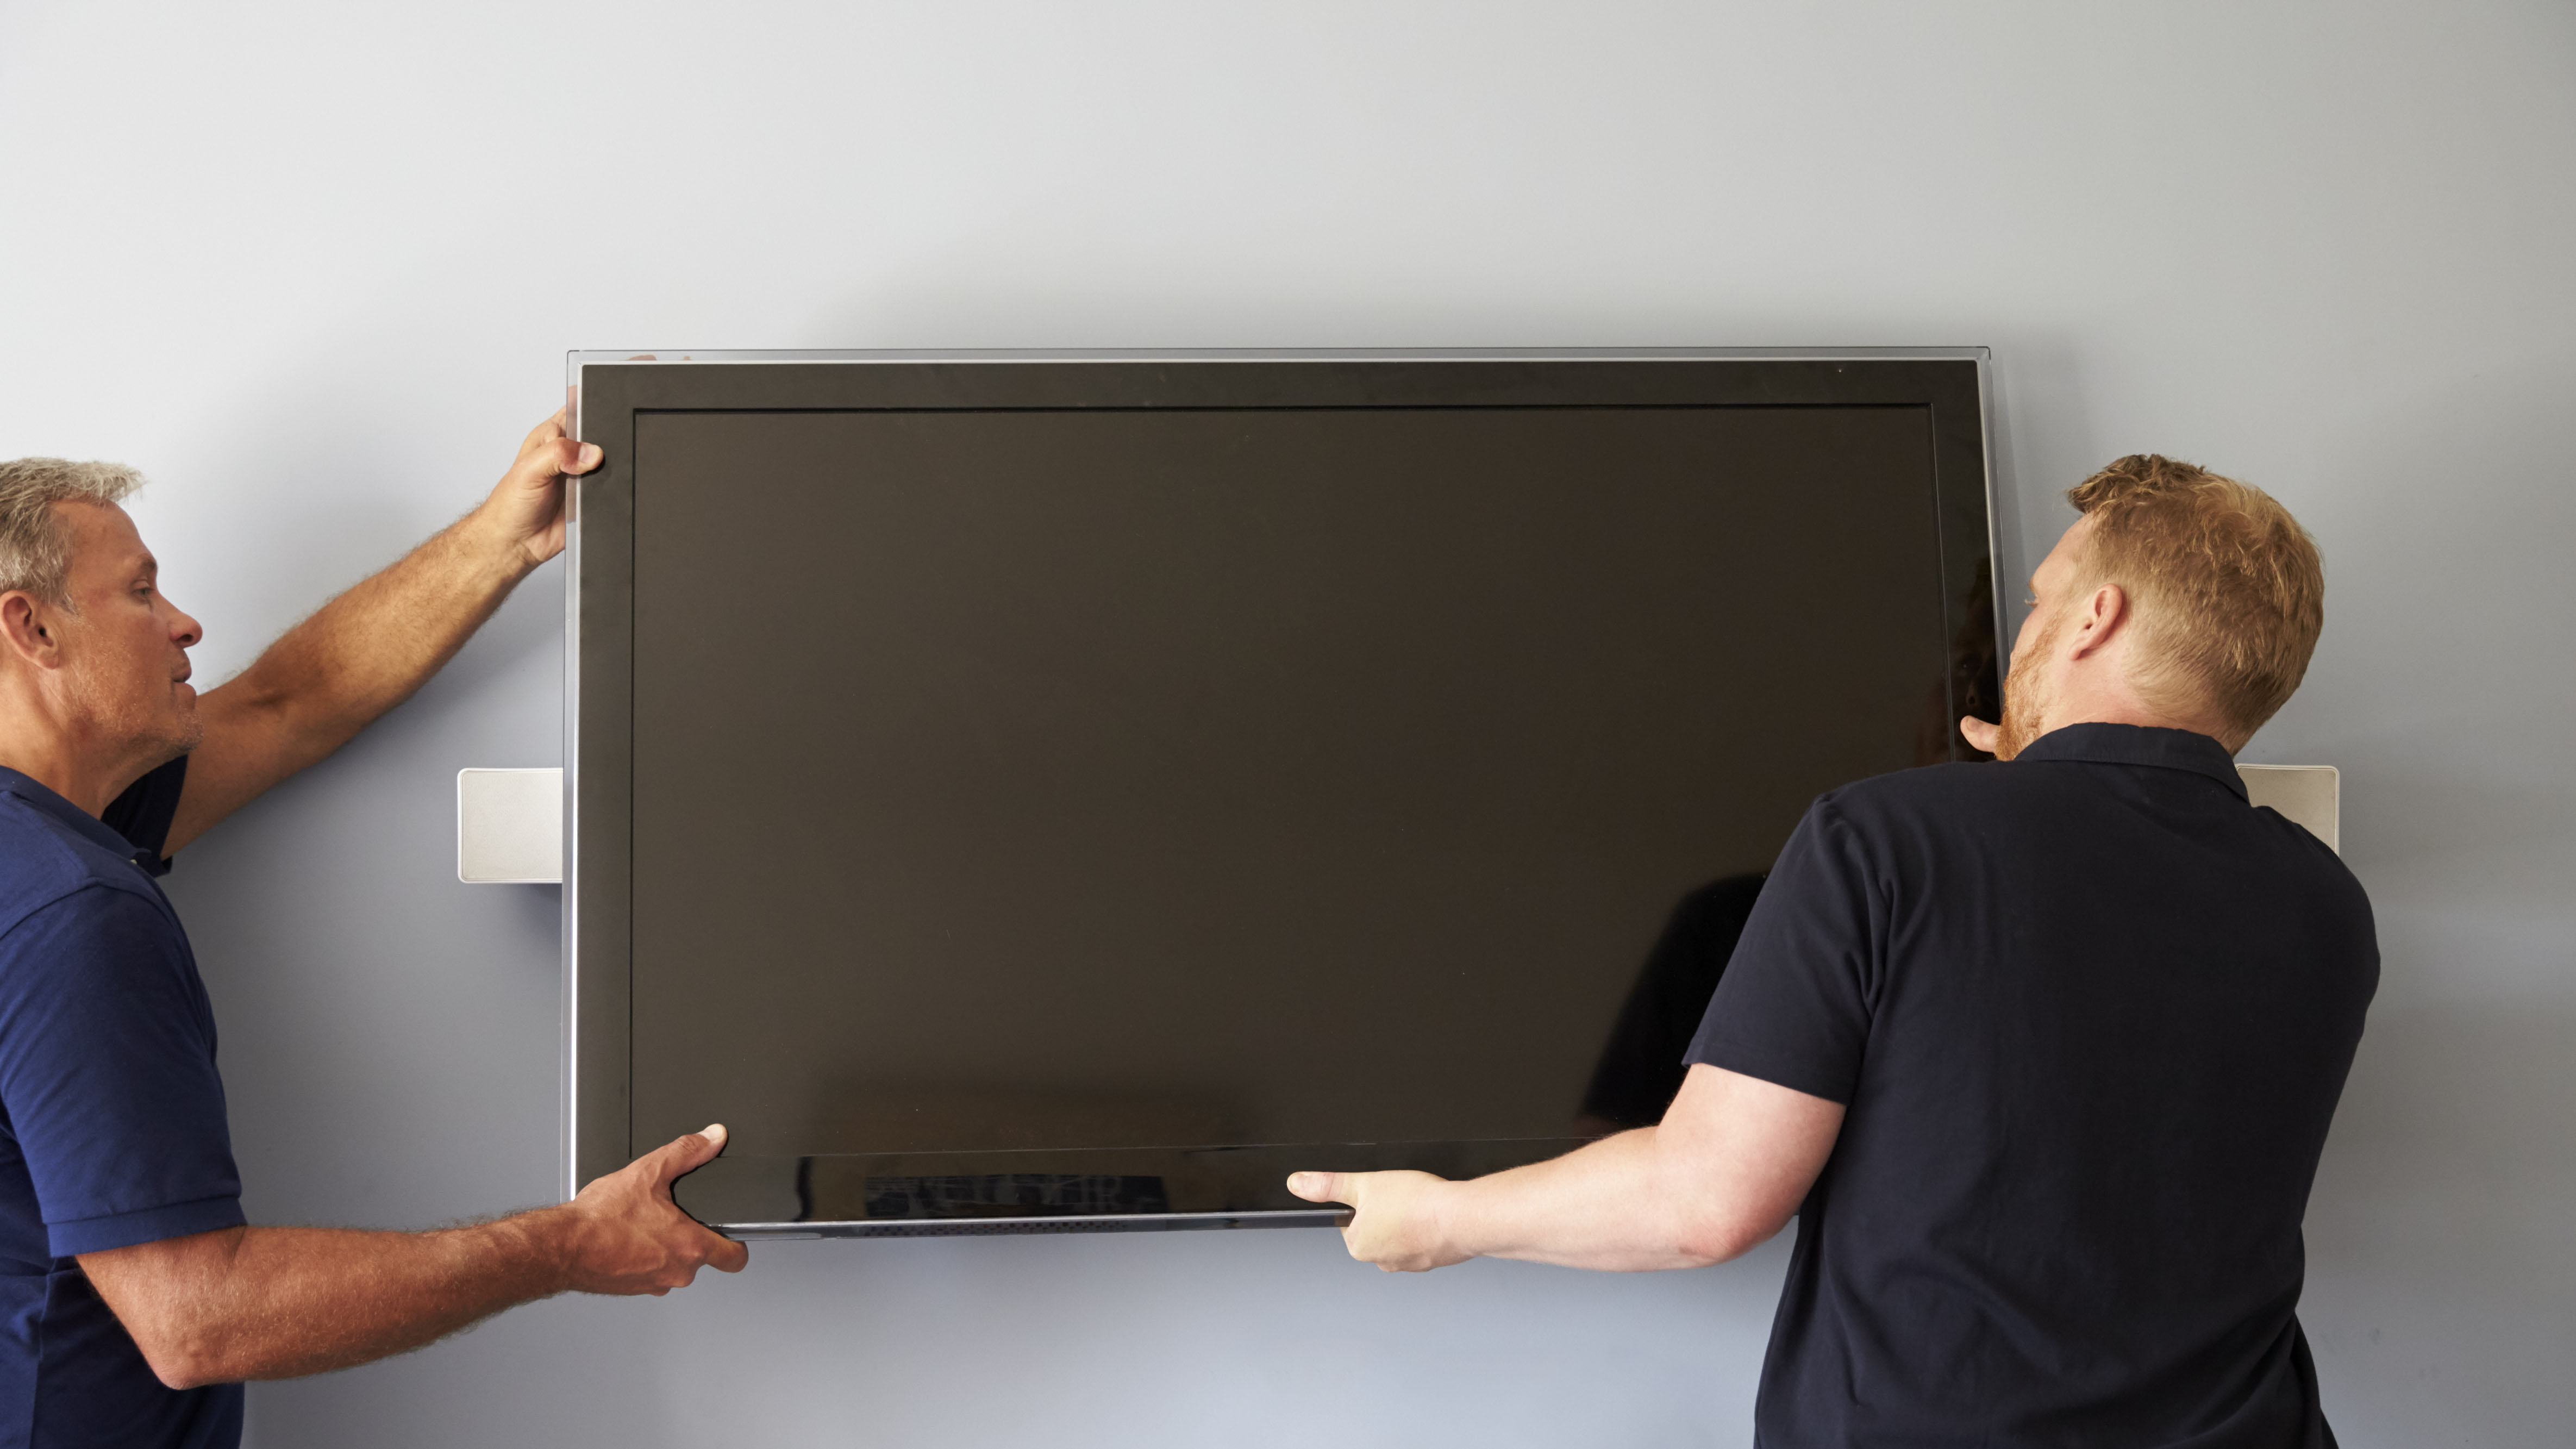 Two men mounting a TV on a wall